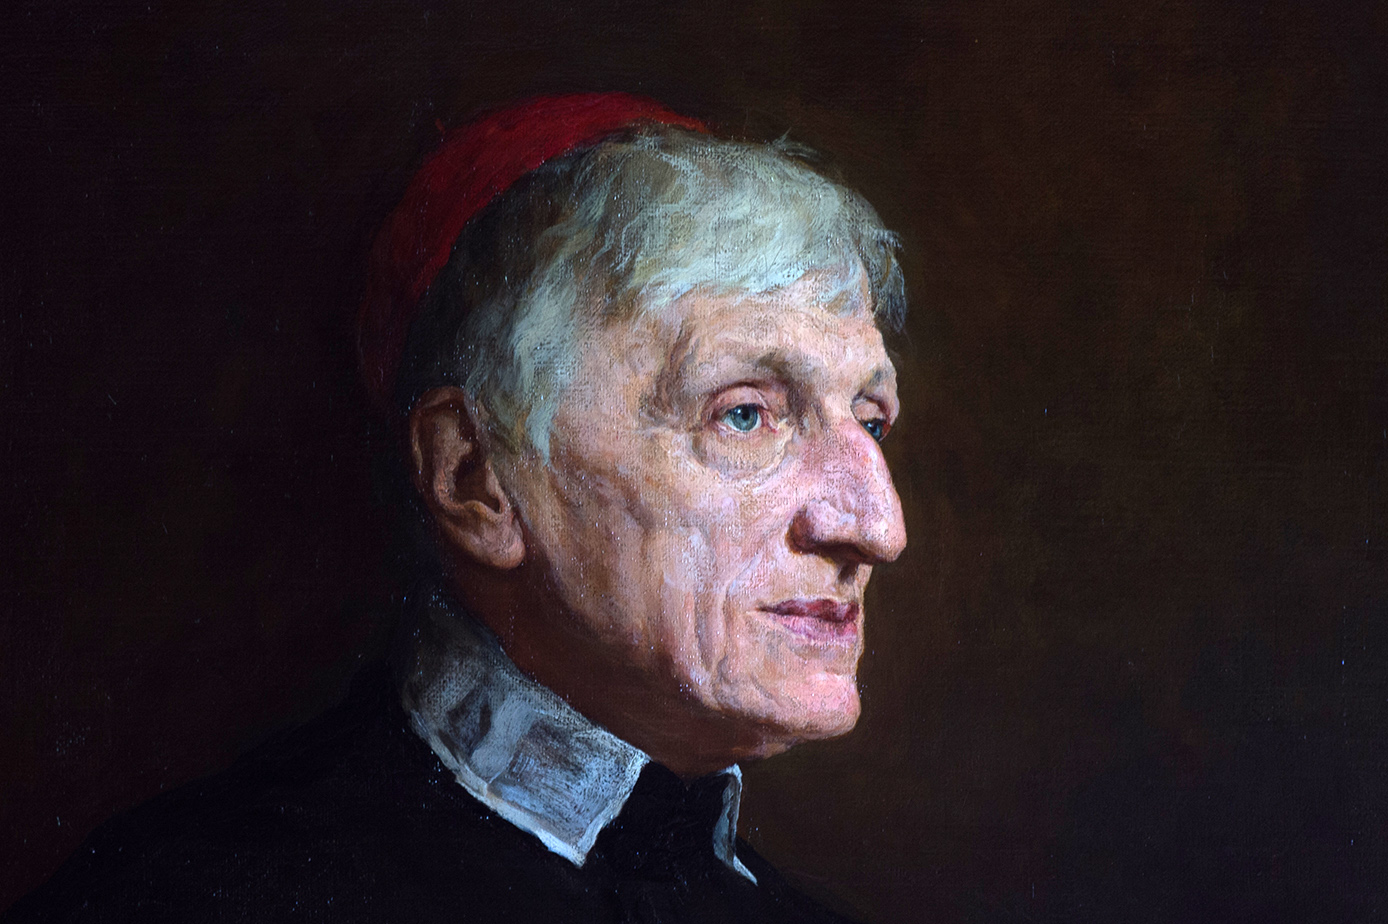 With Cardinal Newman’s canonization, area Catholics reflect on his legacy.